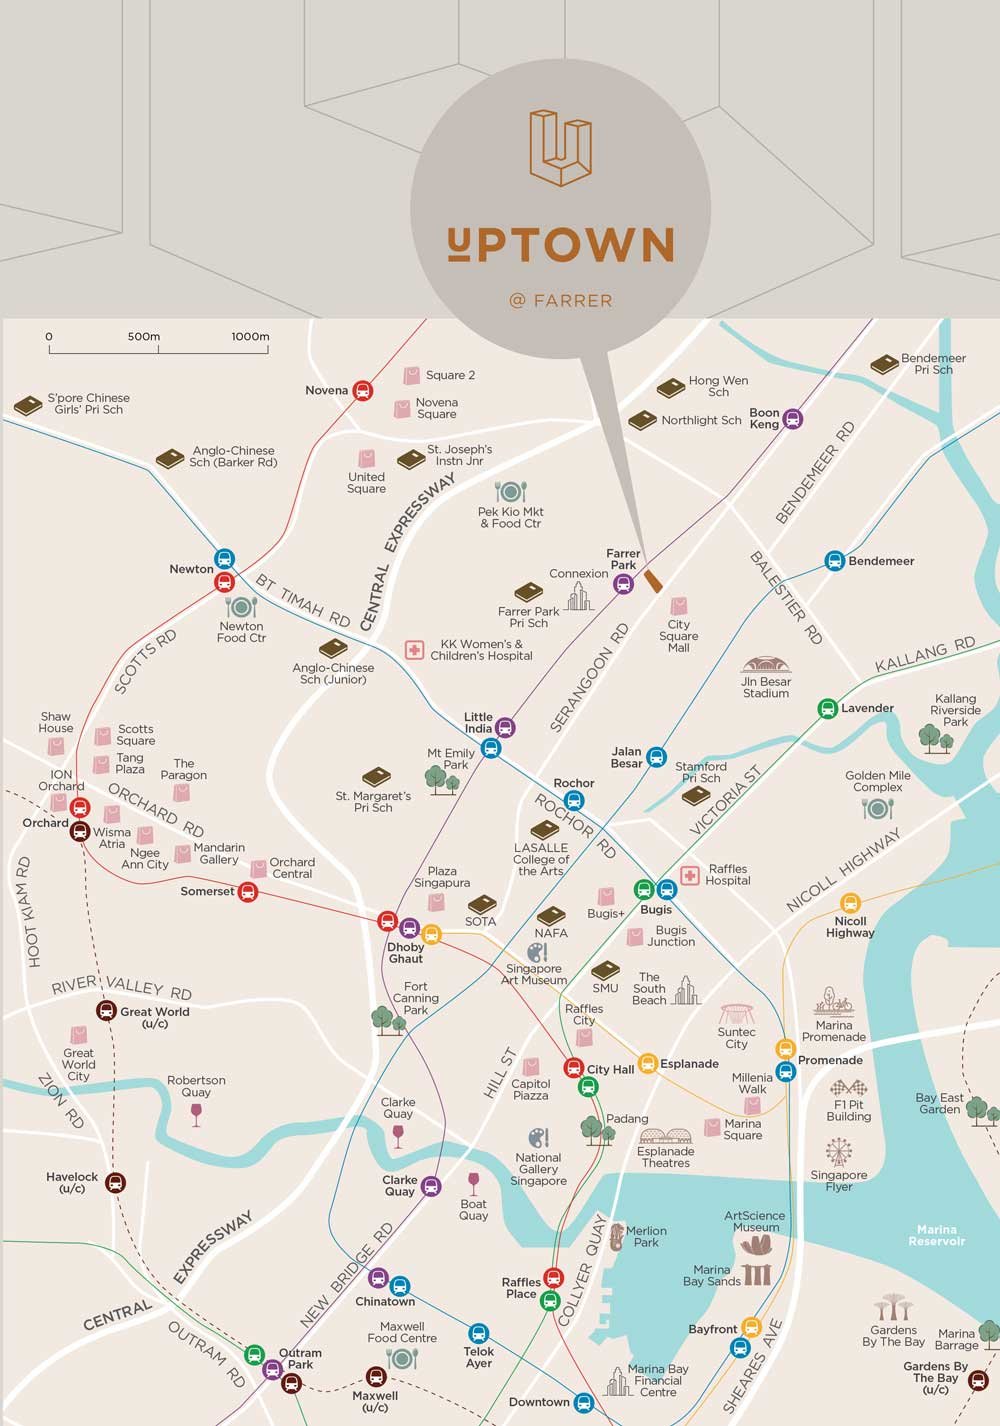 uptown-at-farrer-location-map